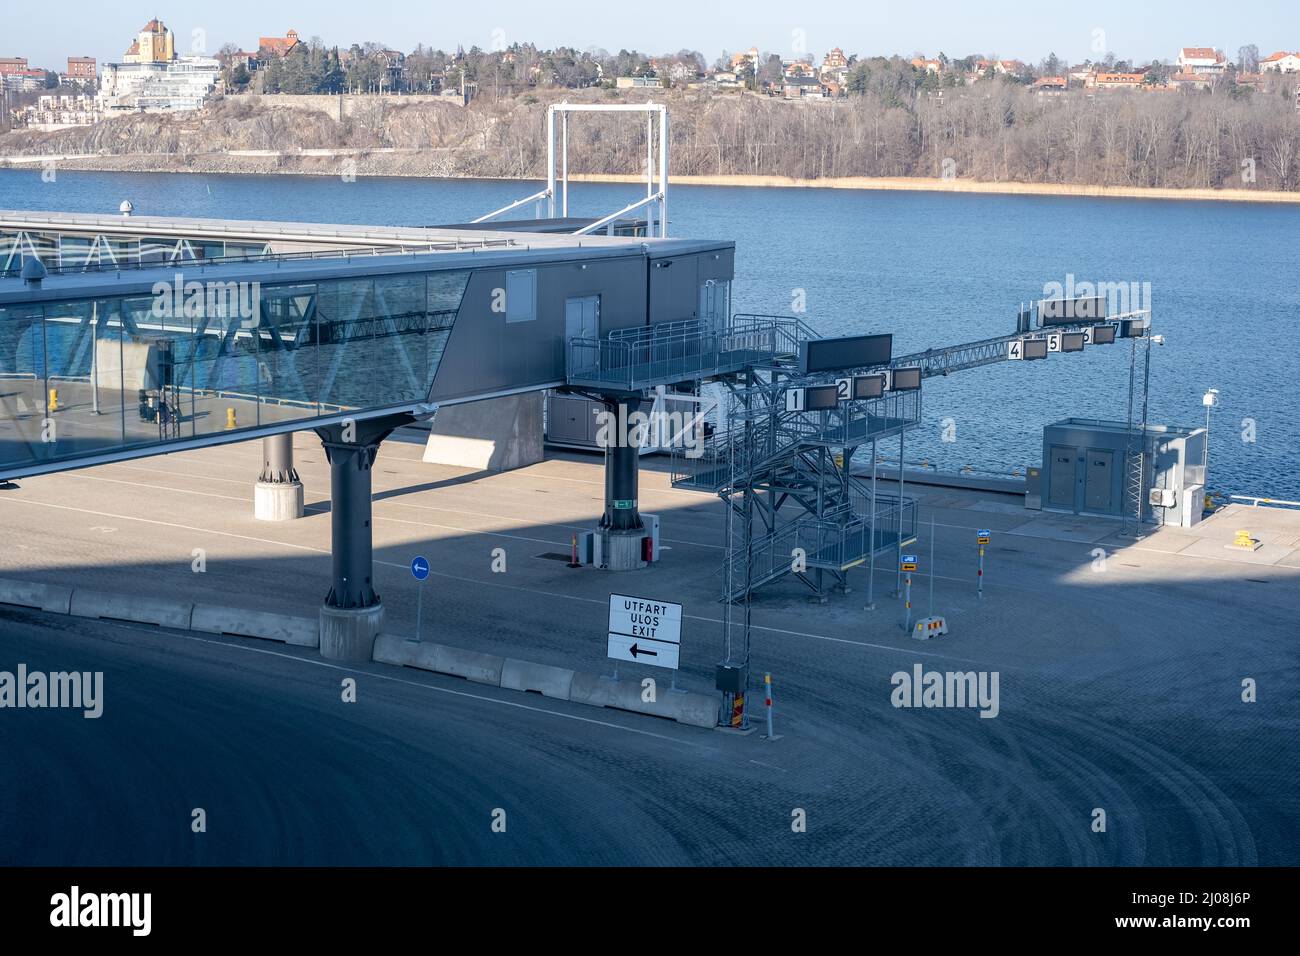 Stockholm / Sweden - MARCH 14, 2022: Closeup of an elevated passenger boarding bridge in the harbor Stock Photo